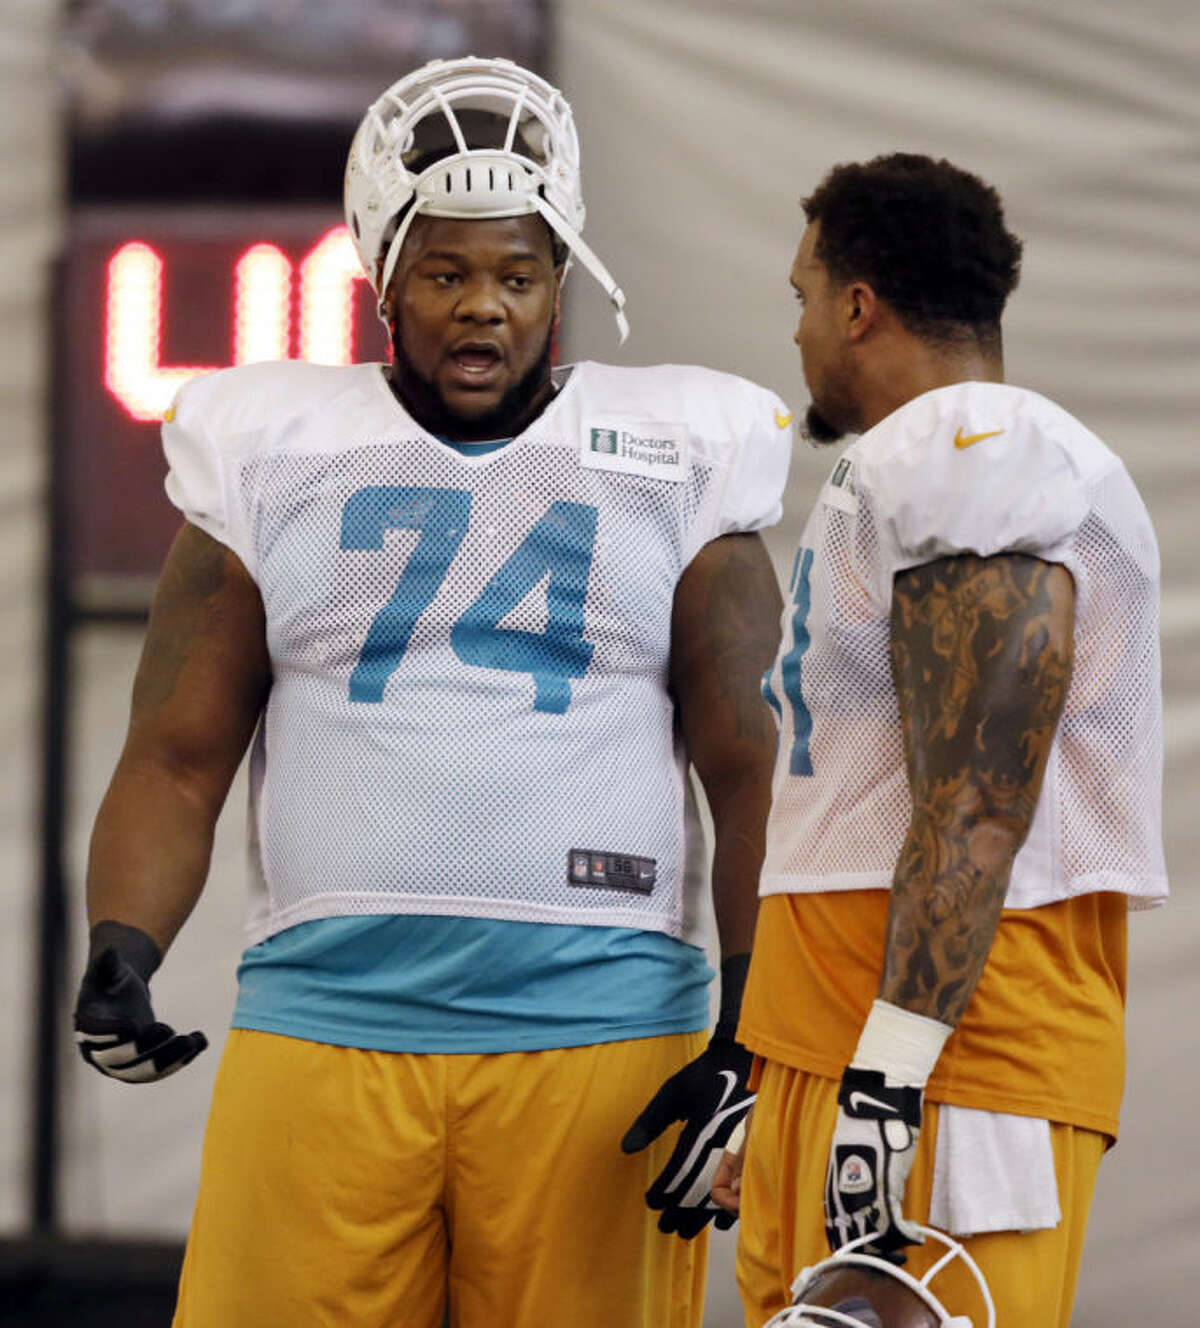 FILE - In this Nov. 4, 2013, file photo, Miami Dolphins guard John Jerry (74) talks with center Mike Pouncey during NFL football practice in Davie, Fla. Dolphins offensive lineman Jonathan Martin was subjected to "a pattern of harassment" that included racist slurs and vicious sexual taunts about his mother and sister by three teammates, according to a report ordered by the NFL. The report said Richie Incognito, who was suspended by the team in November, and fellow offensive linemen Jerry and Pouncey harassed Martin. (AP Photo/Lynne Sladky)